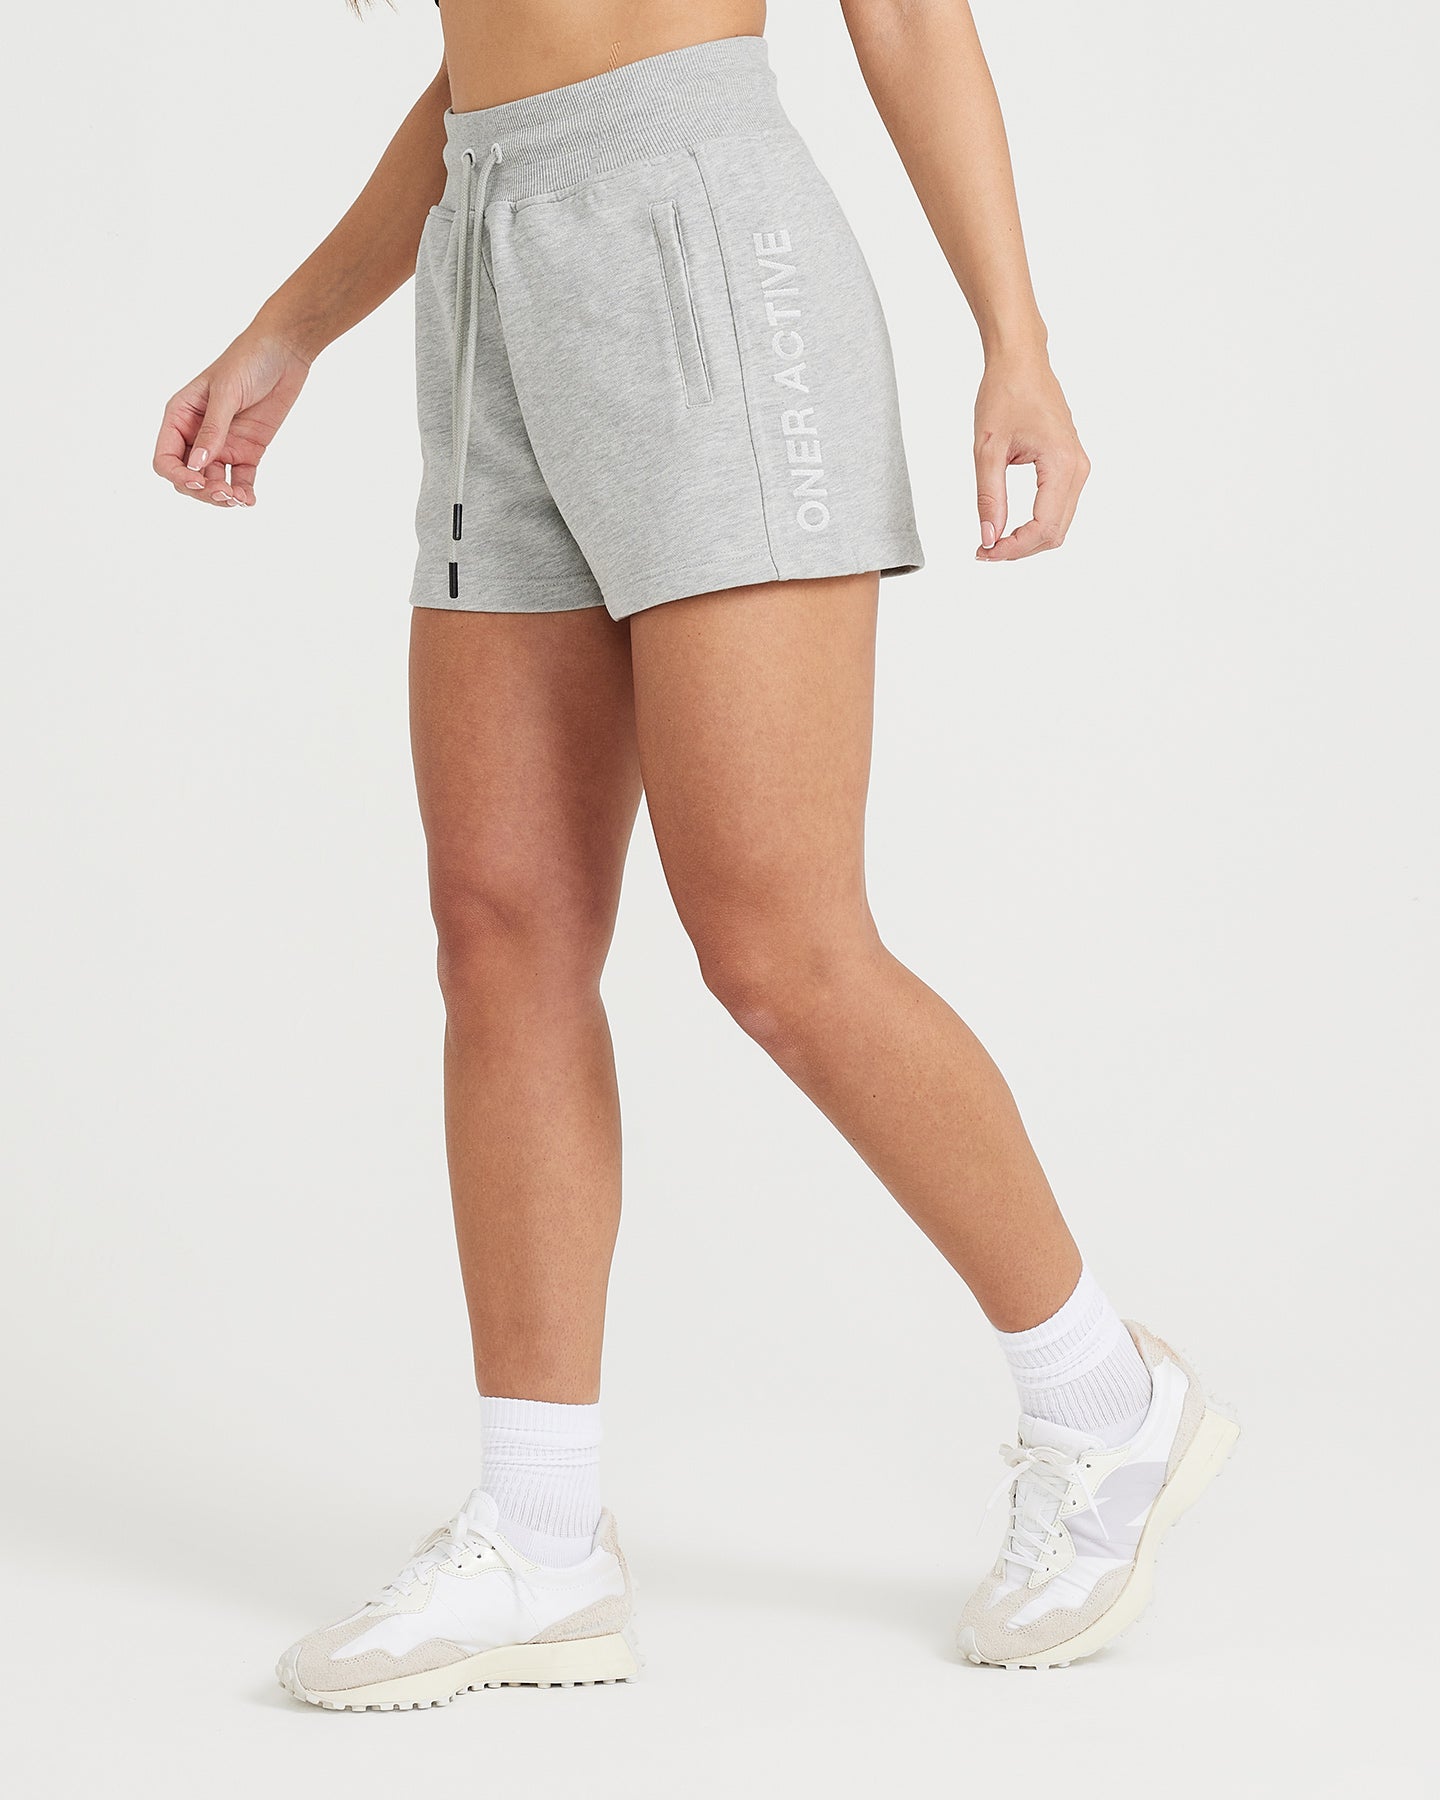 Womens Lightweight Shorts - Silver Marl | Oner Active US